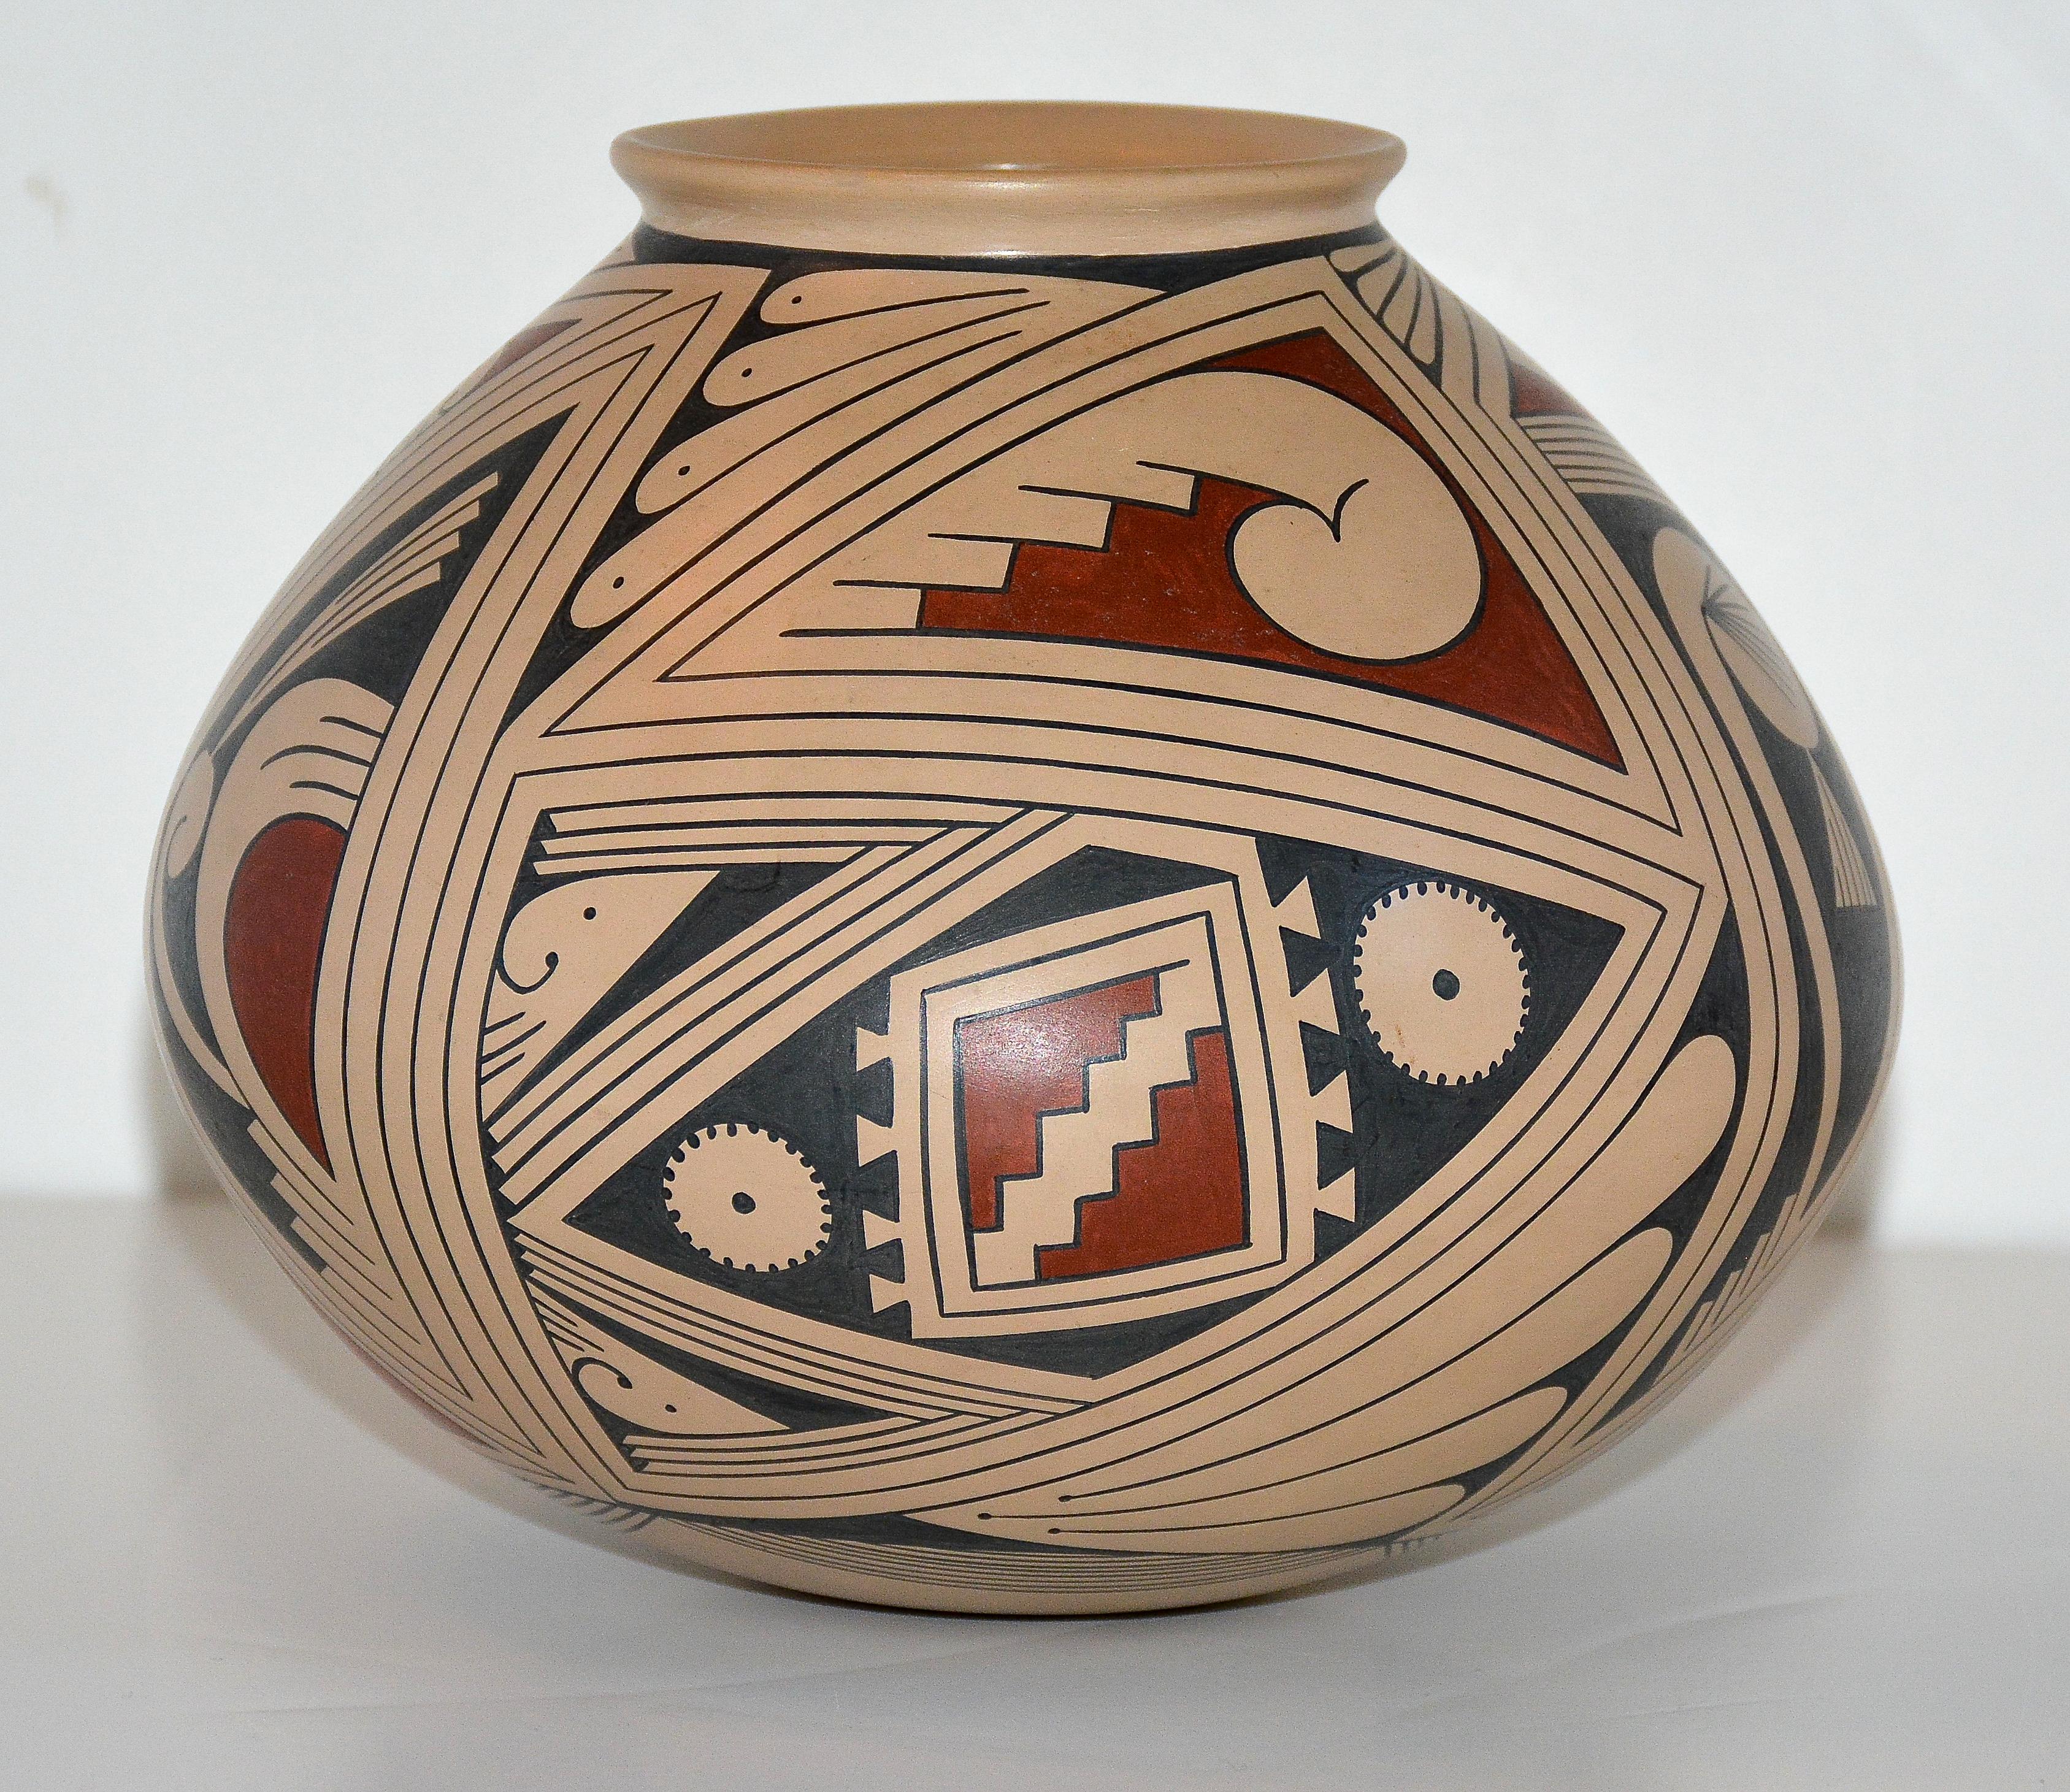 Mata Ortiz Polychrome Pottery vessel
Pilo Mora, Master Potter (1961 - )
1990
Hand coiled low fire clay
Pueblo Quezada, Mata Ortiz, Chihuahua, Mexico
7 inches H. x 7.5 inches in Diameter

A classic example of this Master Potter's early work appearing